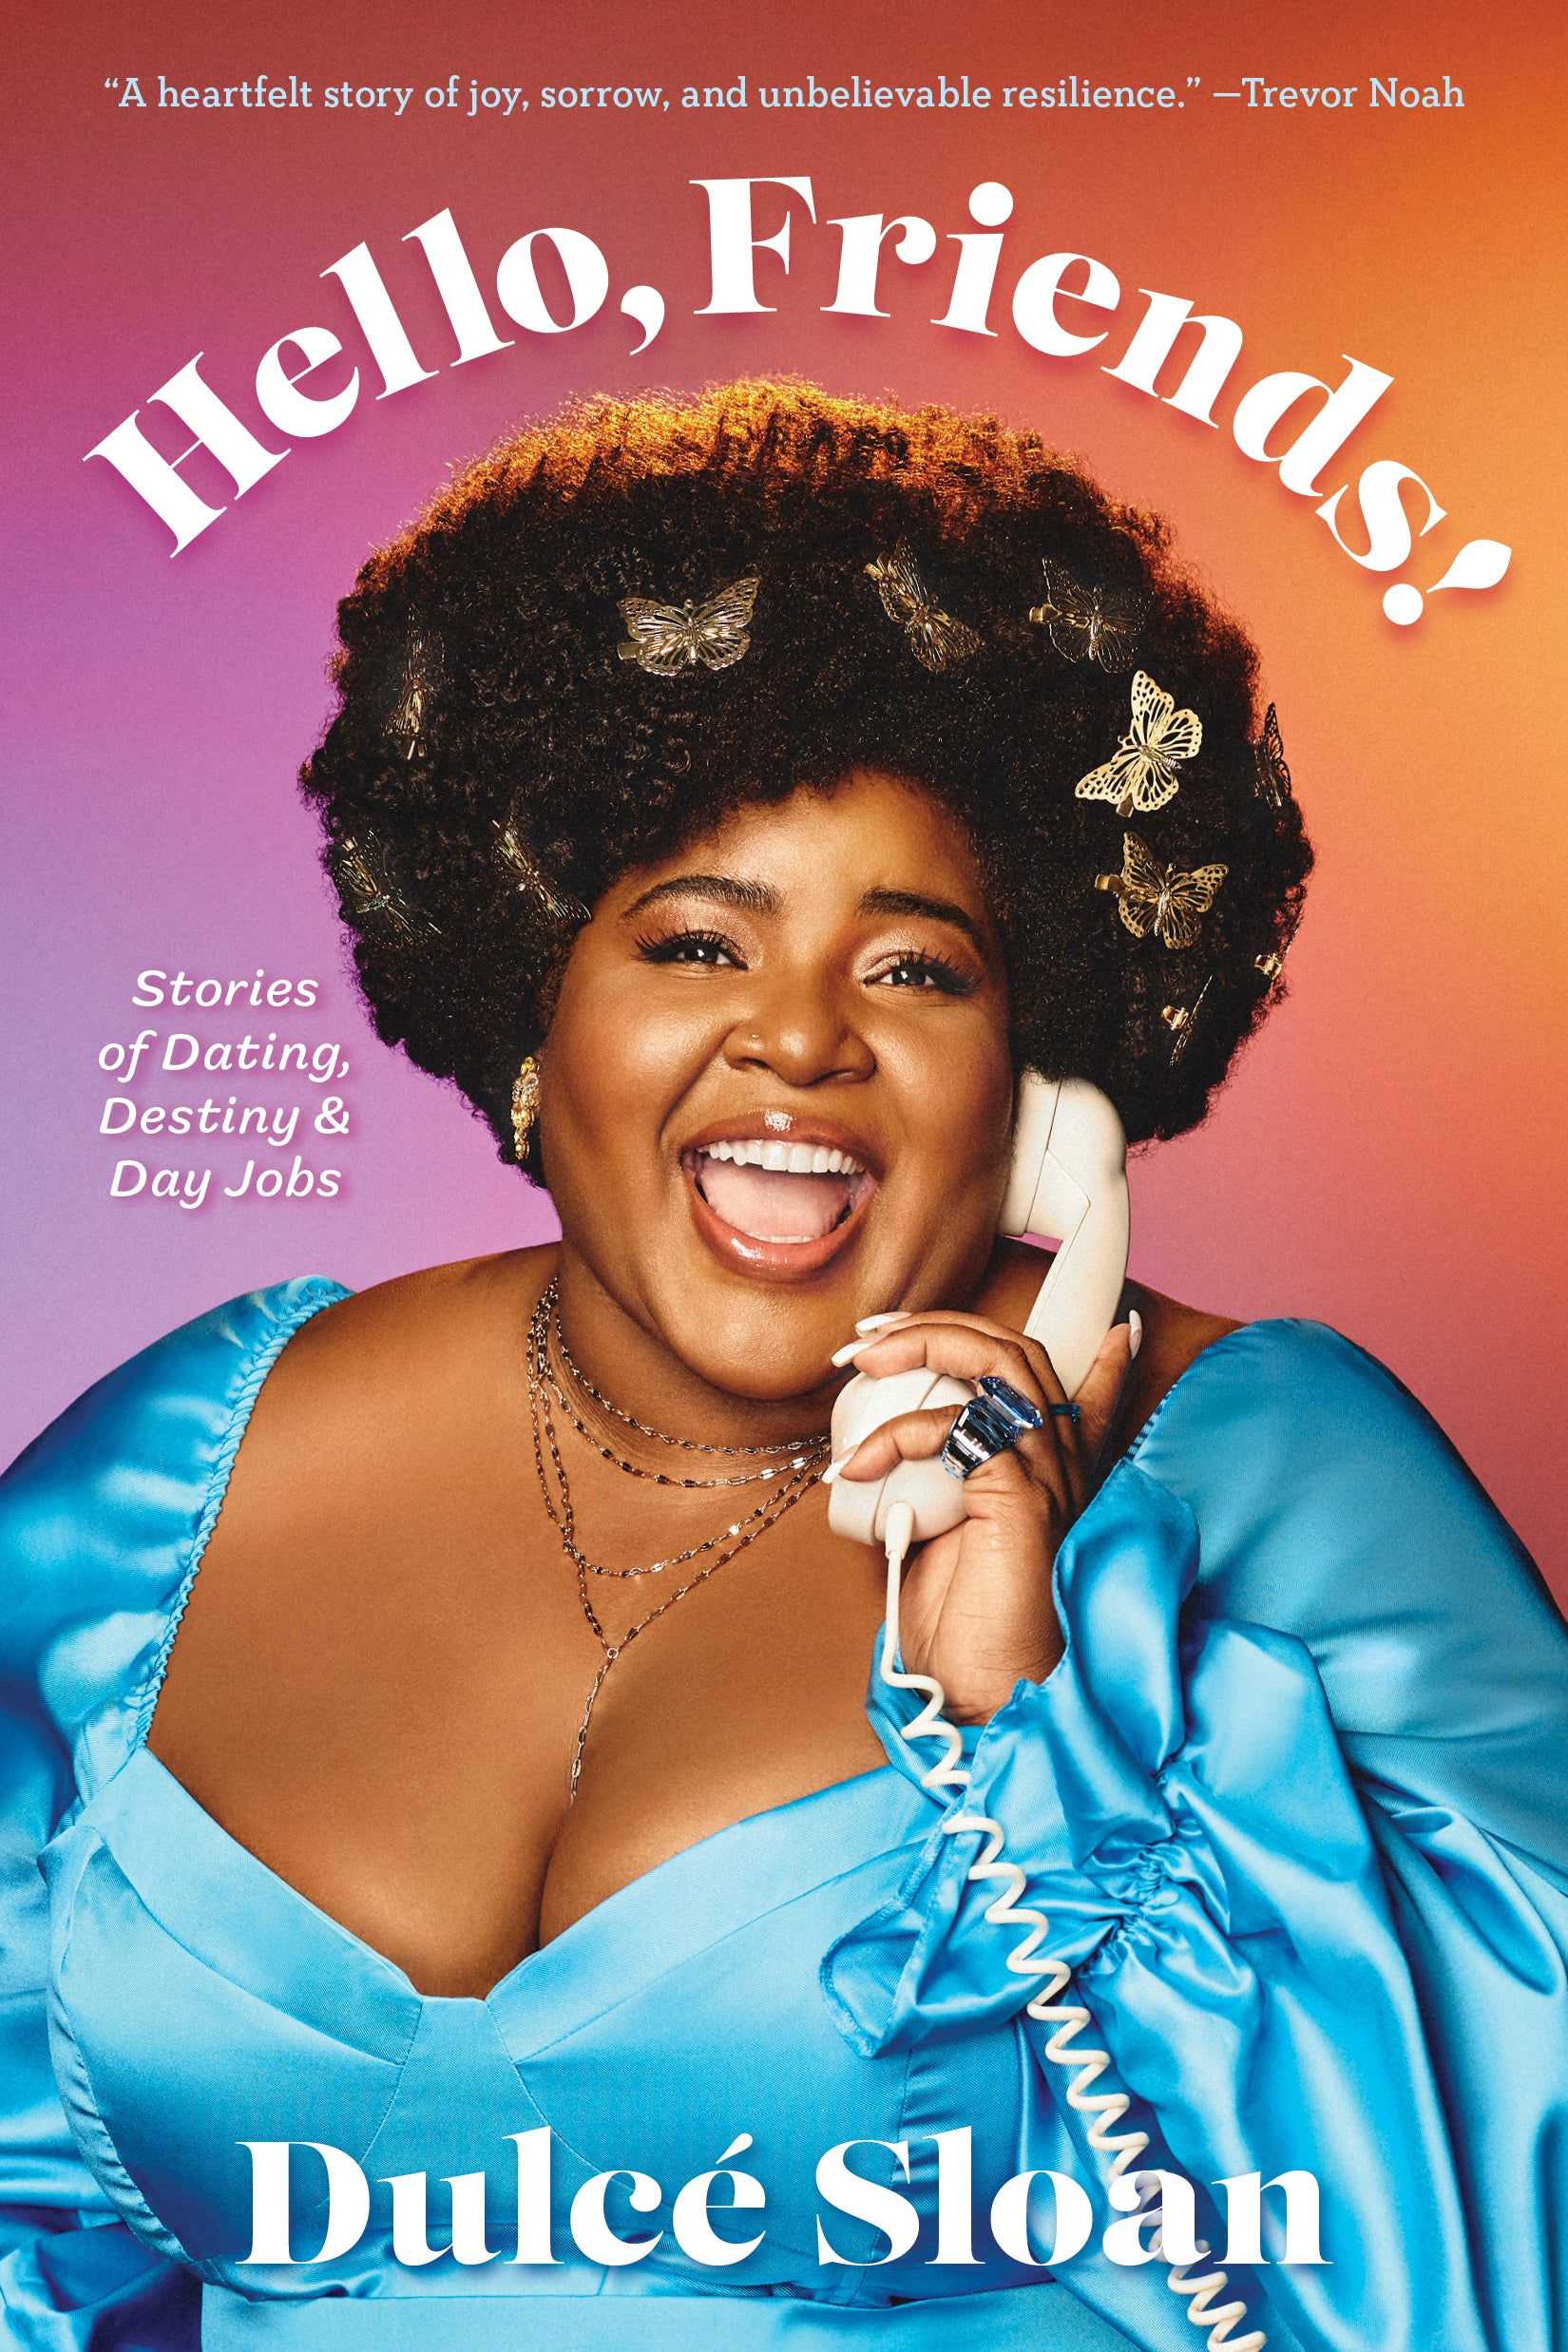 ‘I Didn’t Think At 40 I Would Be This Single’: Comedian Dulcé Sloan Gets Real About Dating In New Memoir